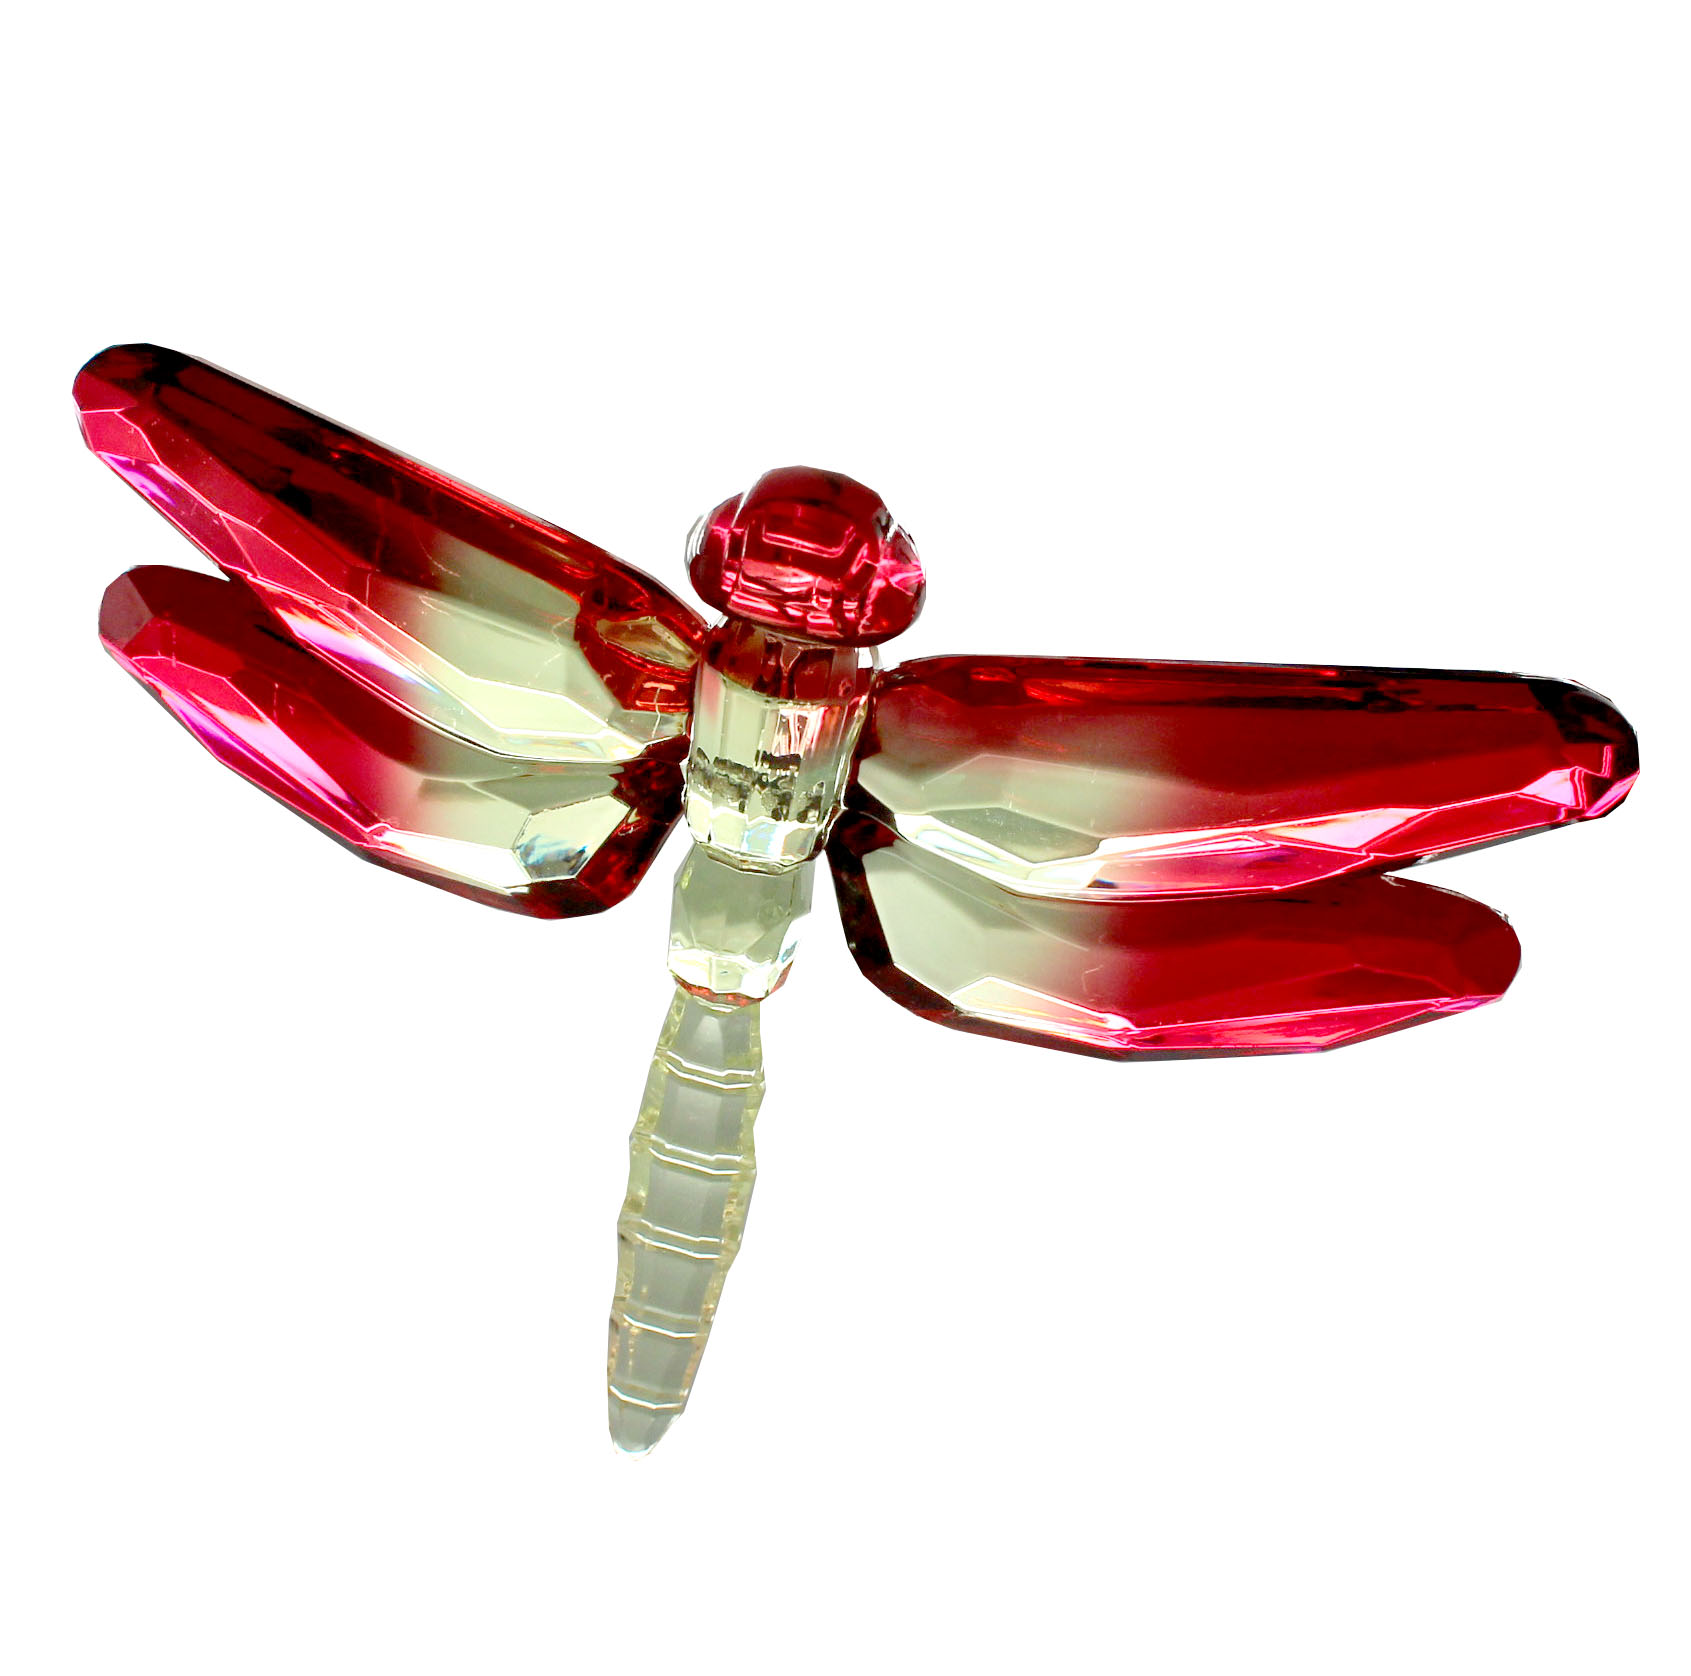 https://www.bestofeverything.com/wp-content/uploads/2018/08/Dragonfly-Ornament-Green-and-Red.jpg